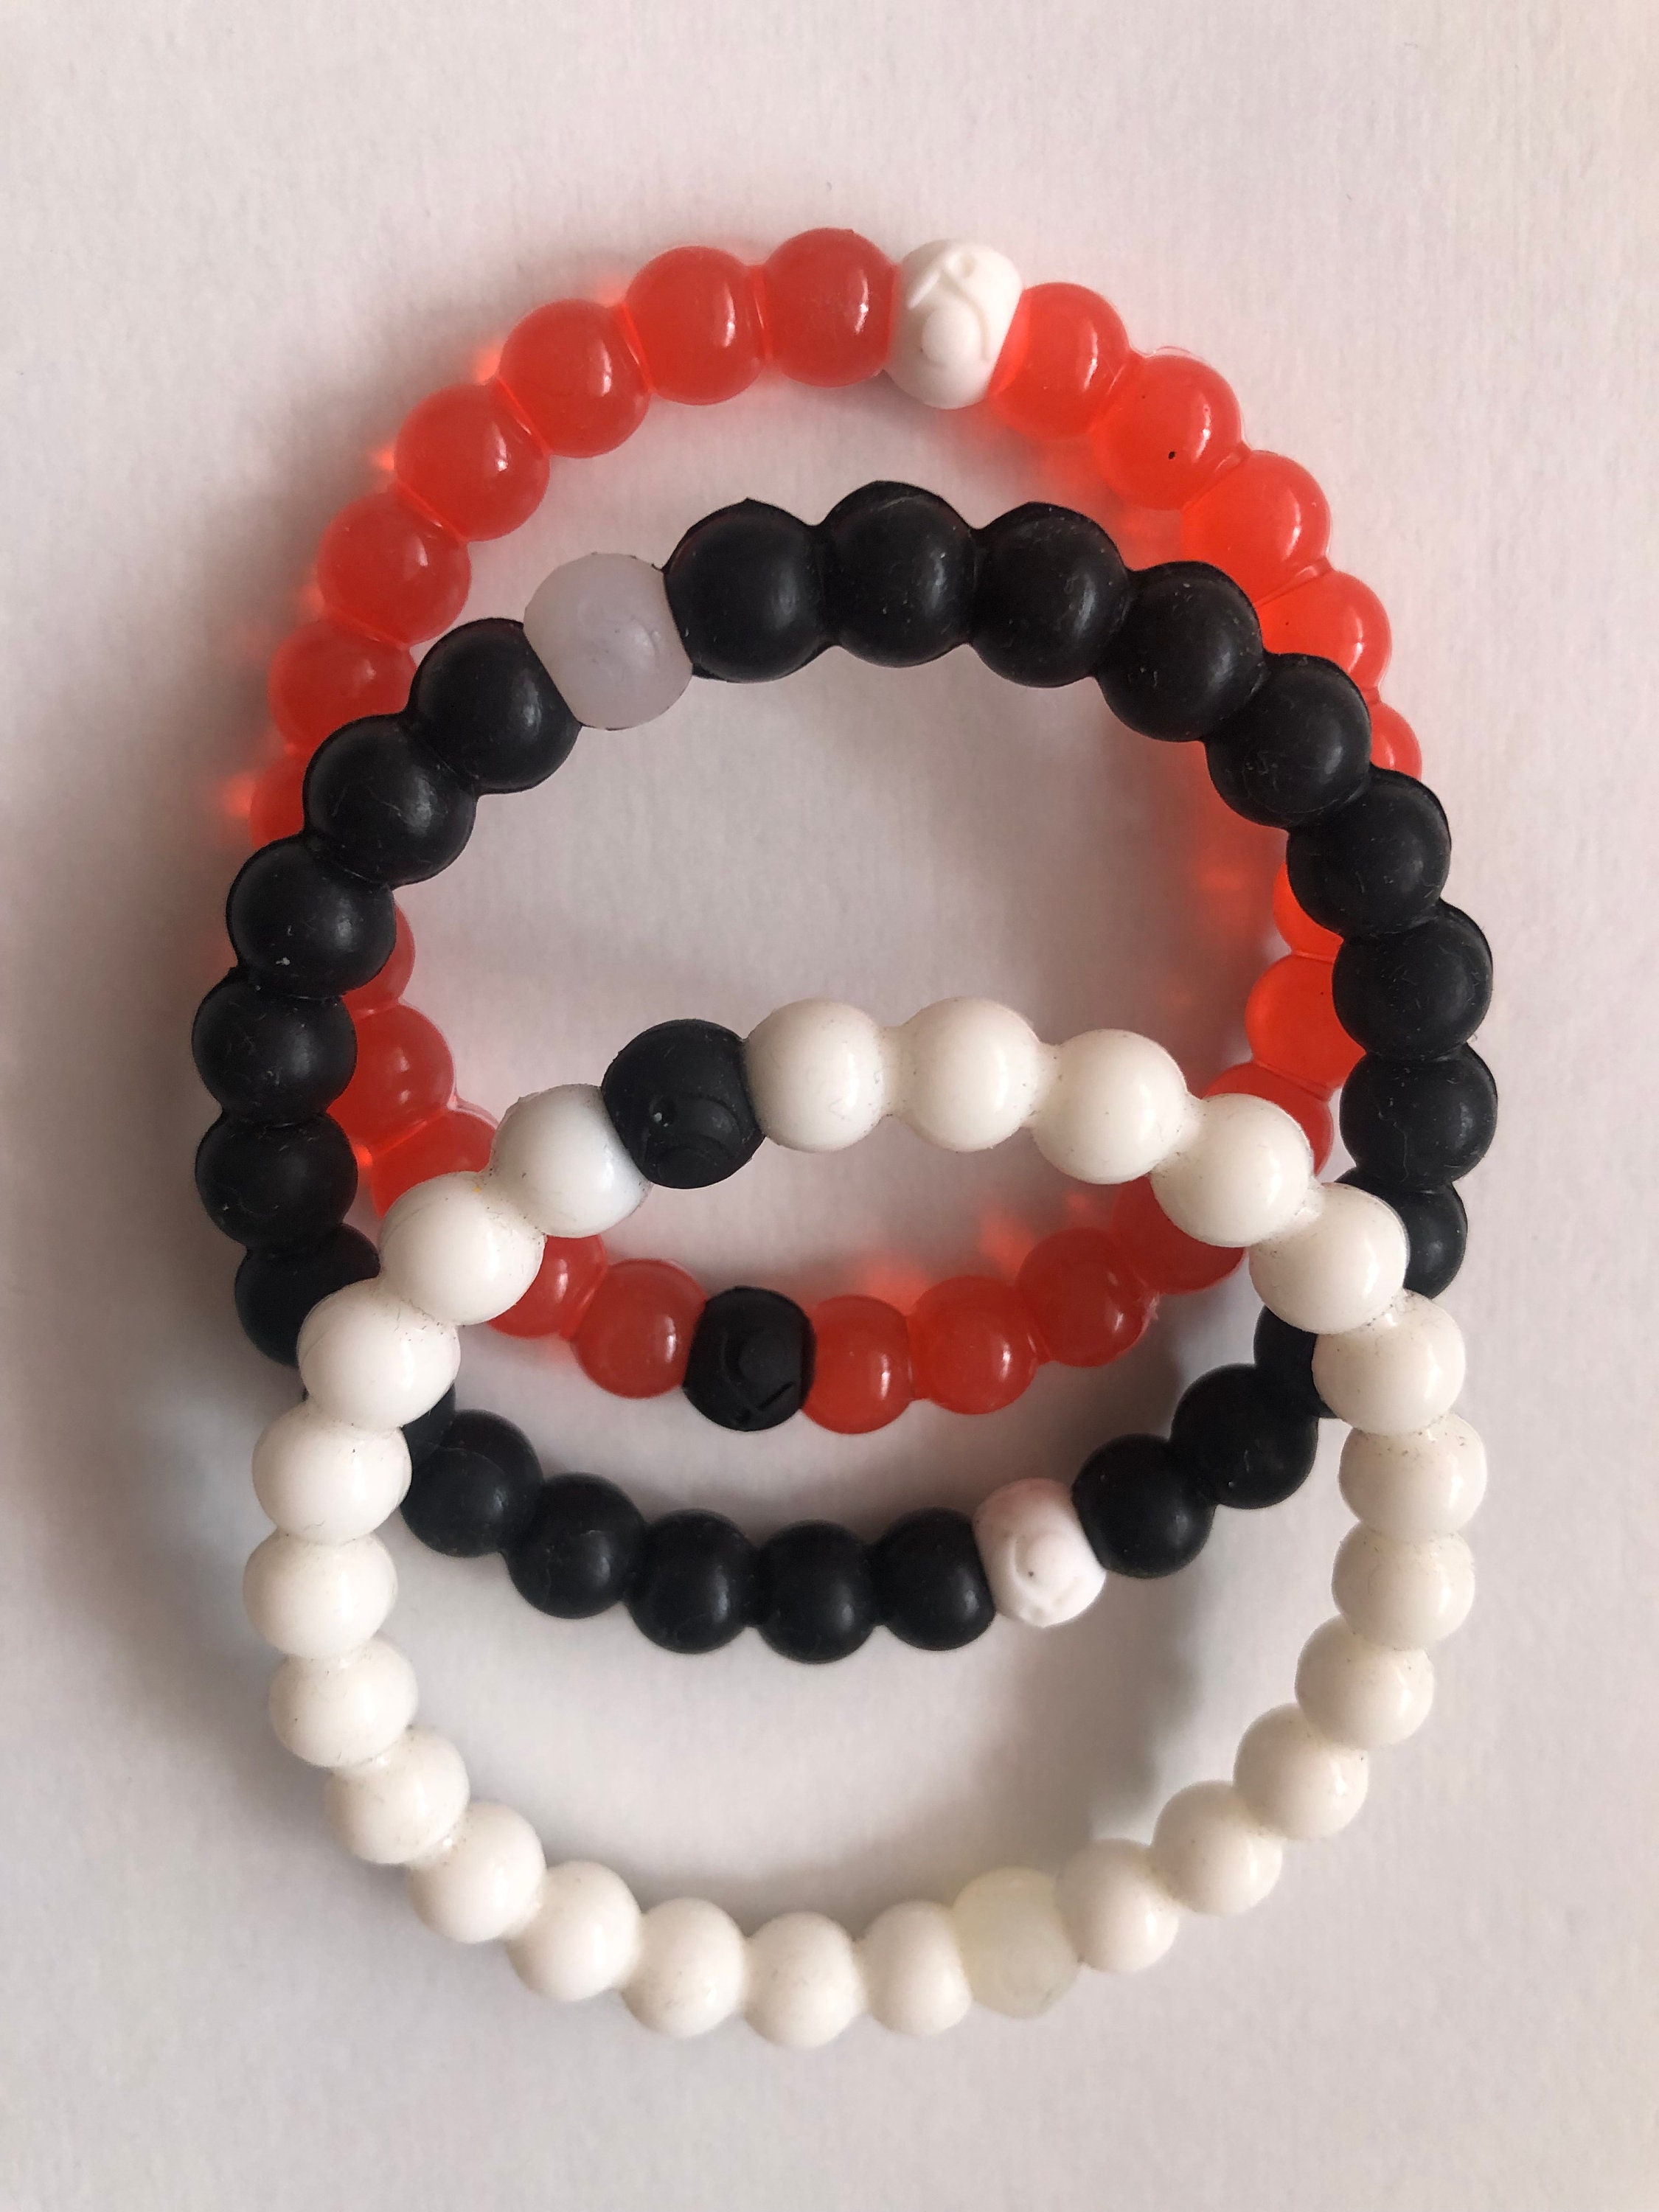 Lokai bracelet - $10 New With Tags - From Emiley